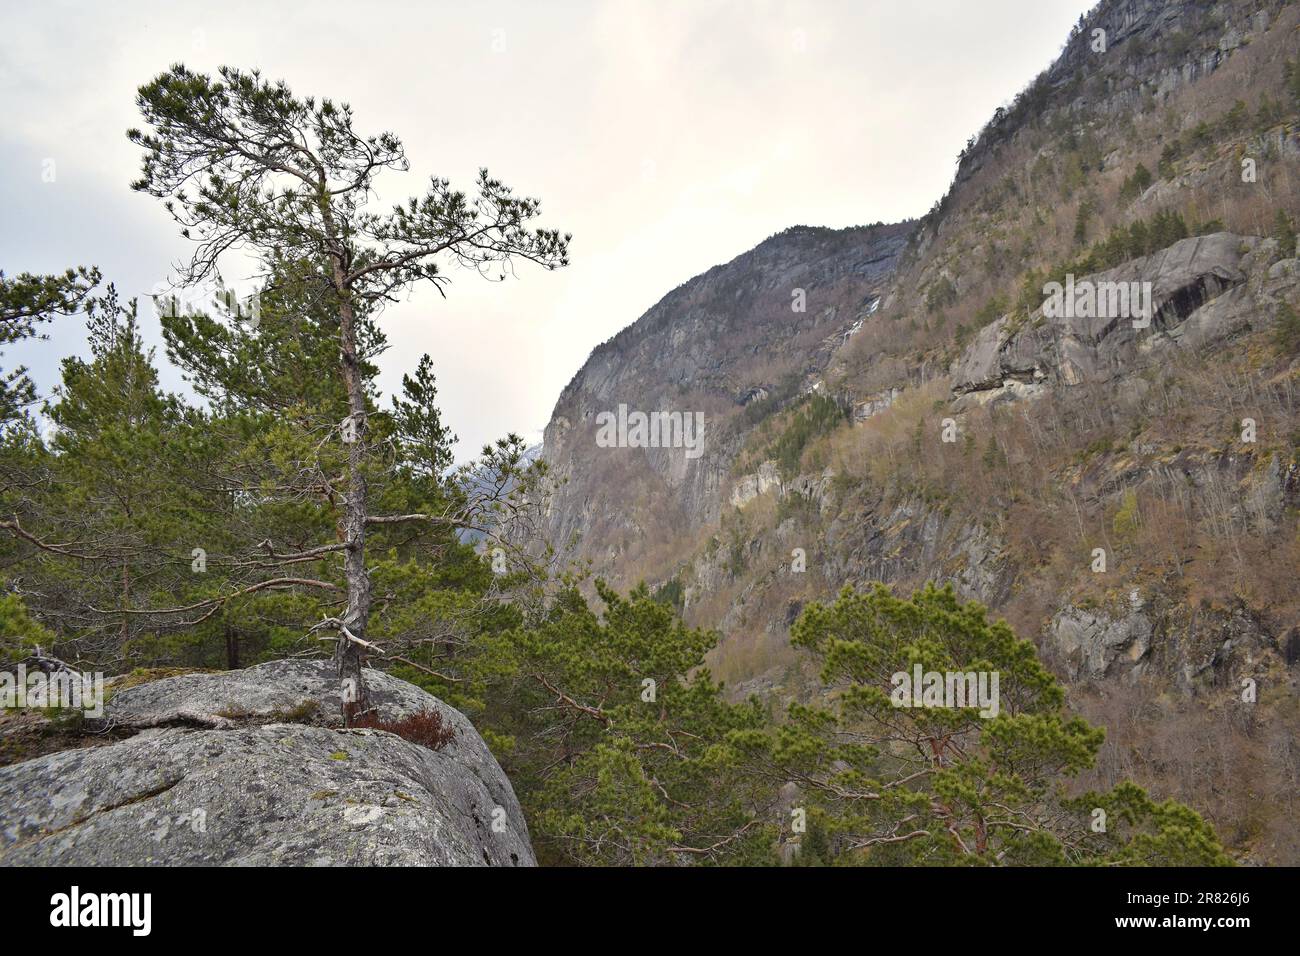 A solitary evergreen tree stands atop a rocky cliff face Stock Photo